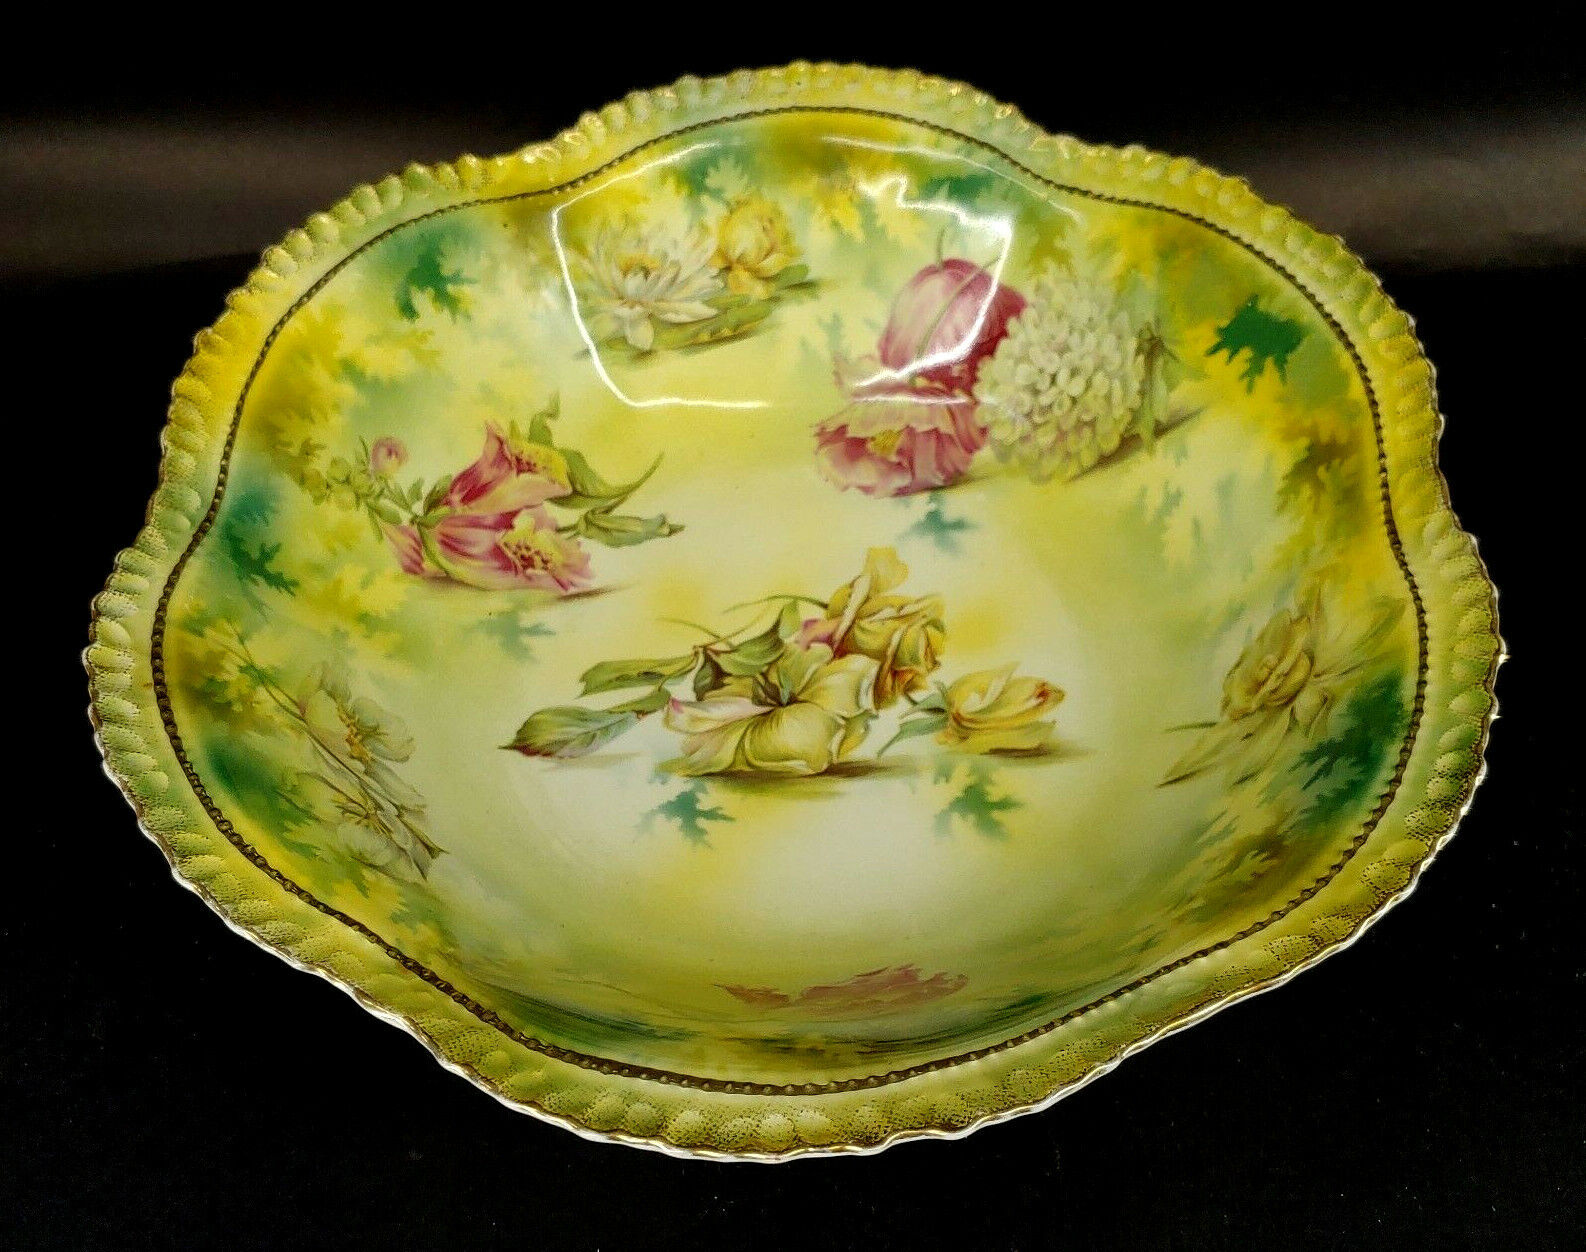 Antique RS Prussia Art Pottery Rose & Tulip Ruffled Edge Bowl 1870s s-1I